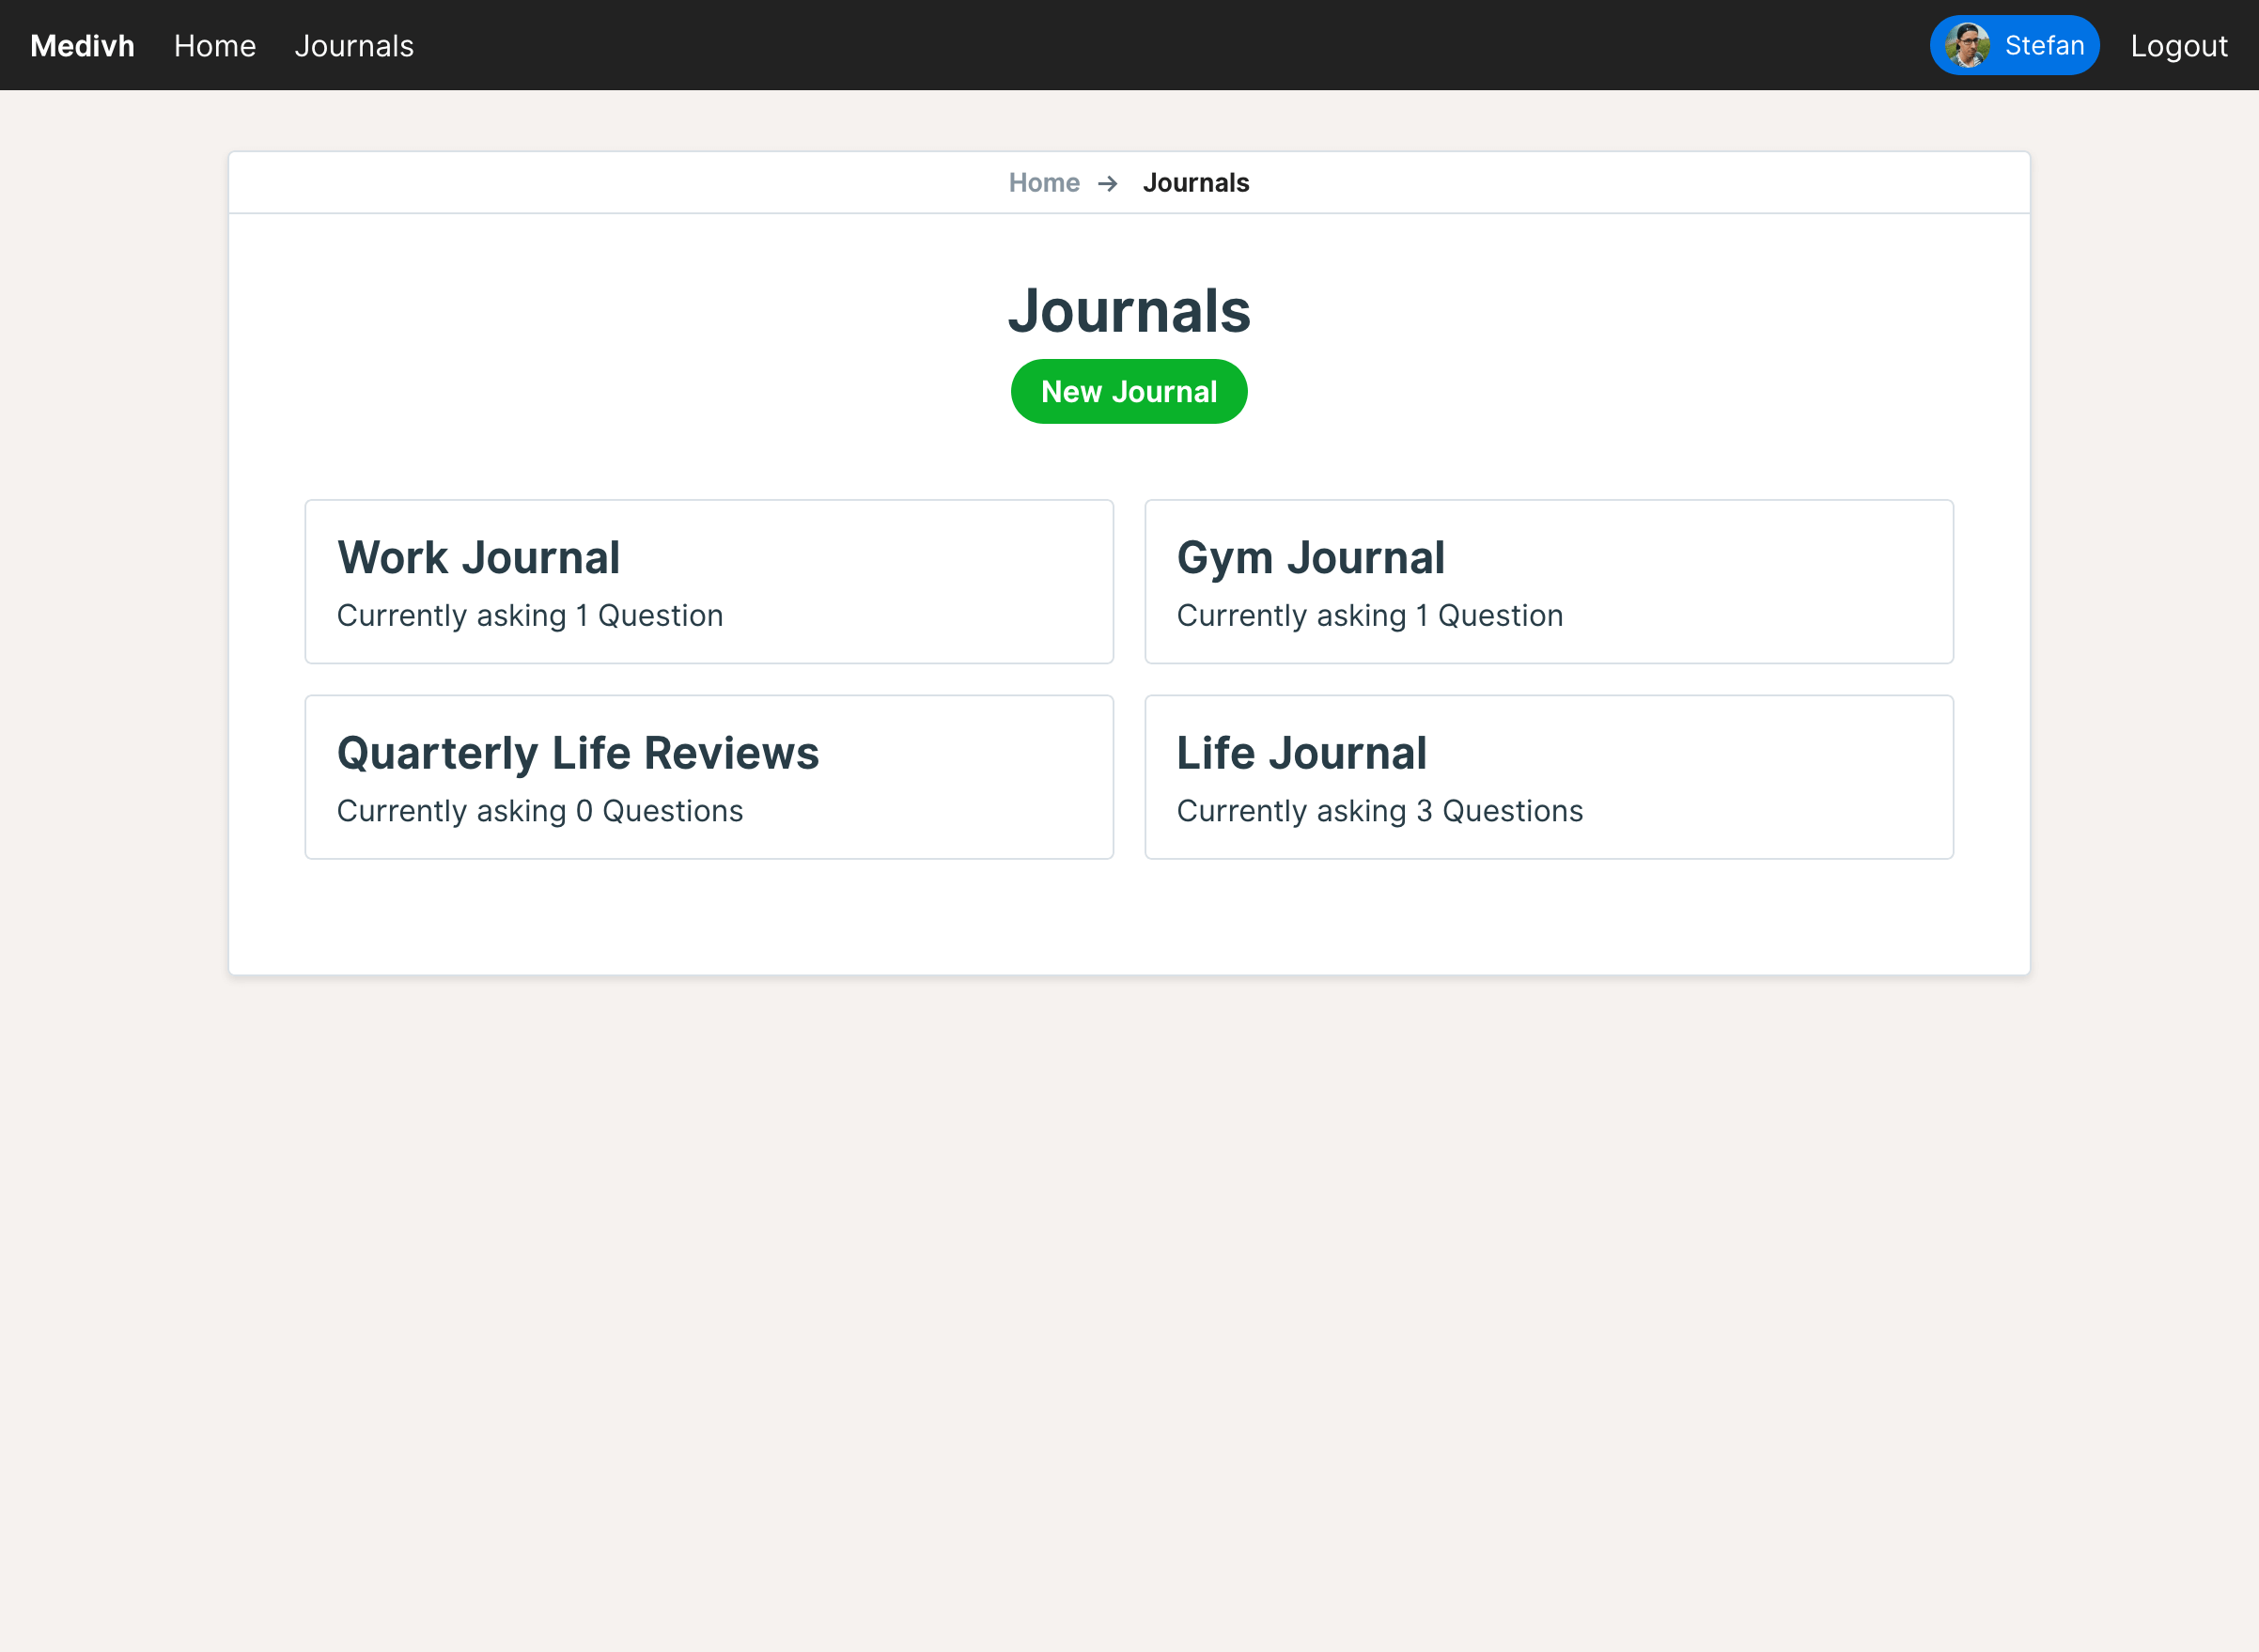 Overview of all available Journals of the current user